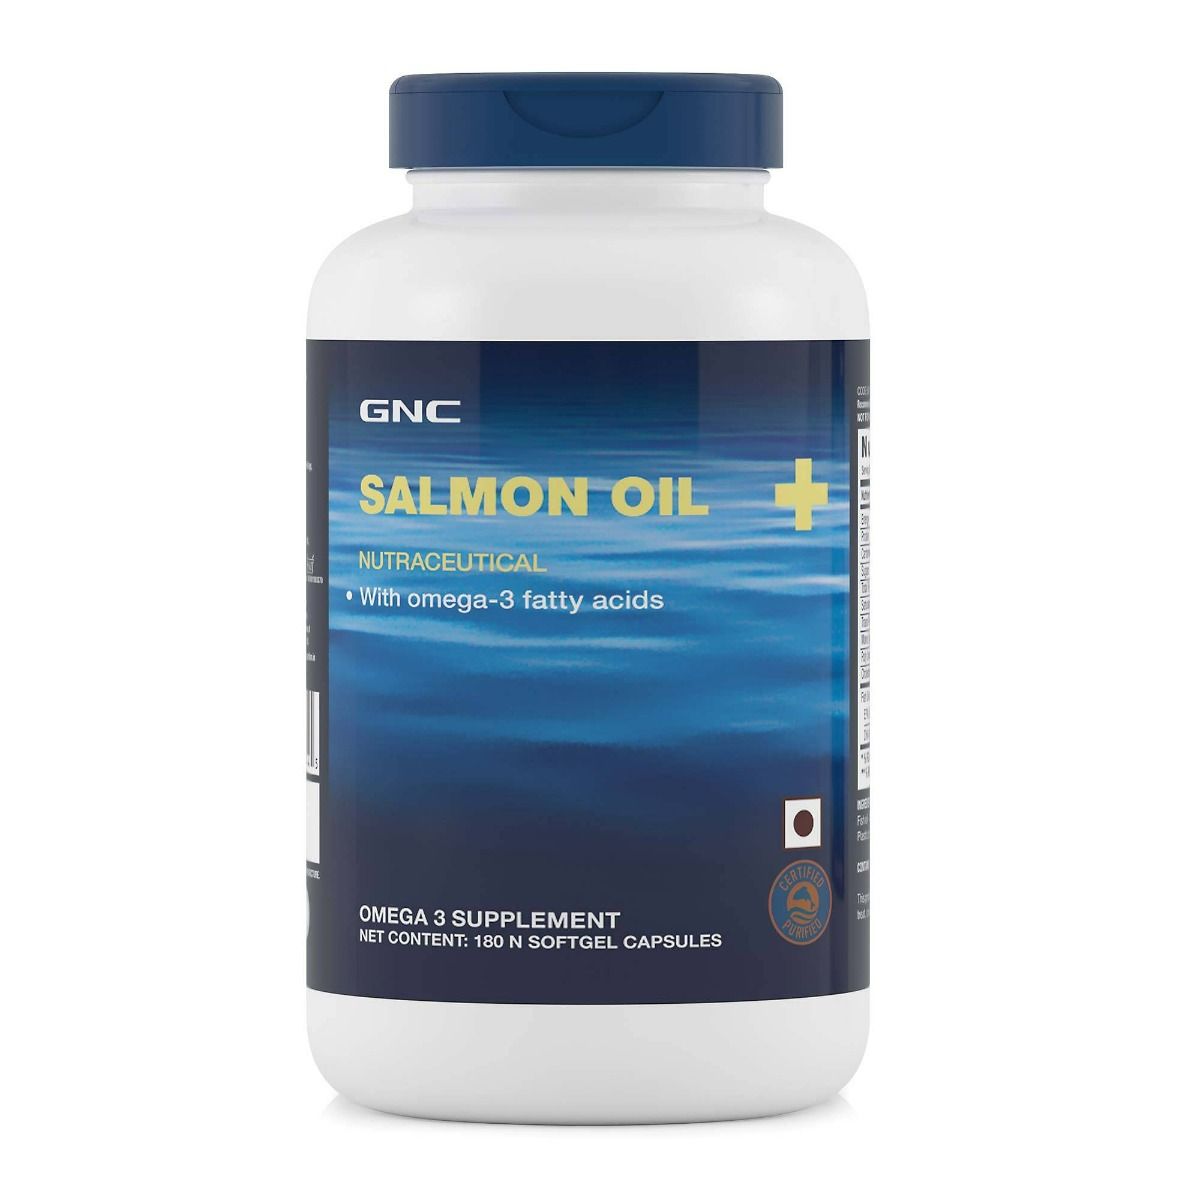 Buy GNC Salmon Oil Plus with Omega-3 Fatty Acids Softgel, 180 Capsules Online